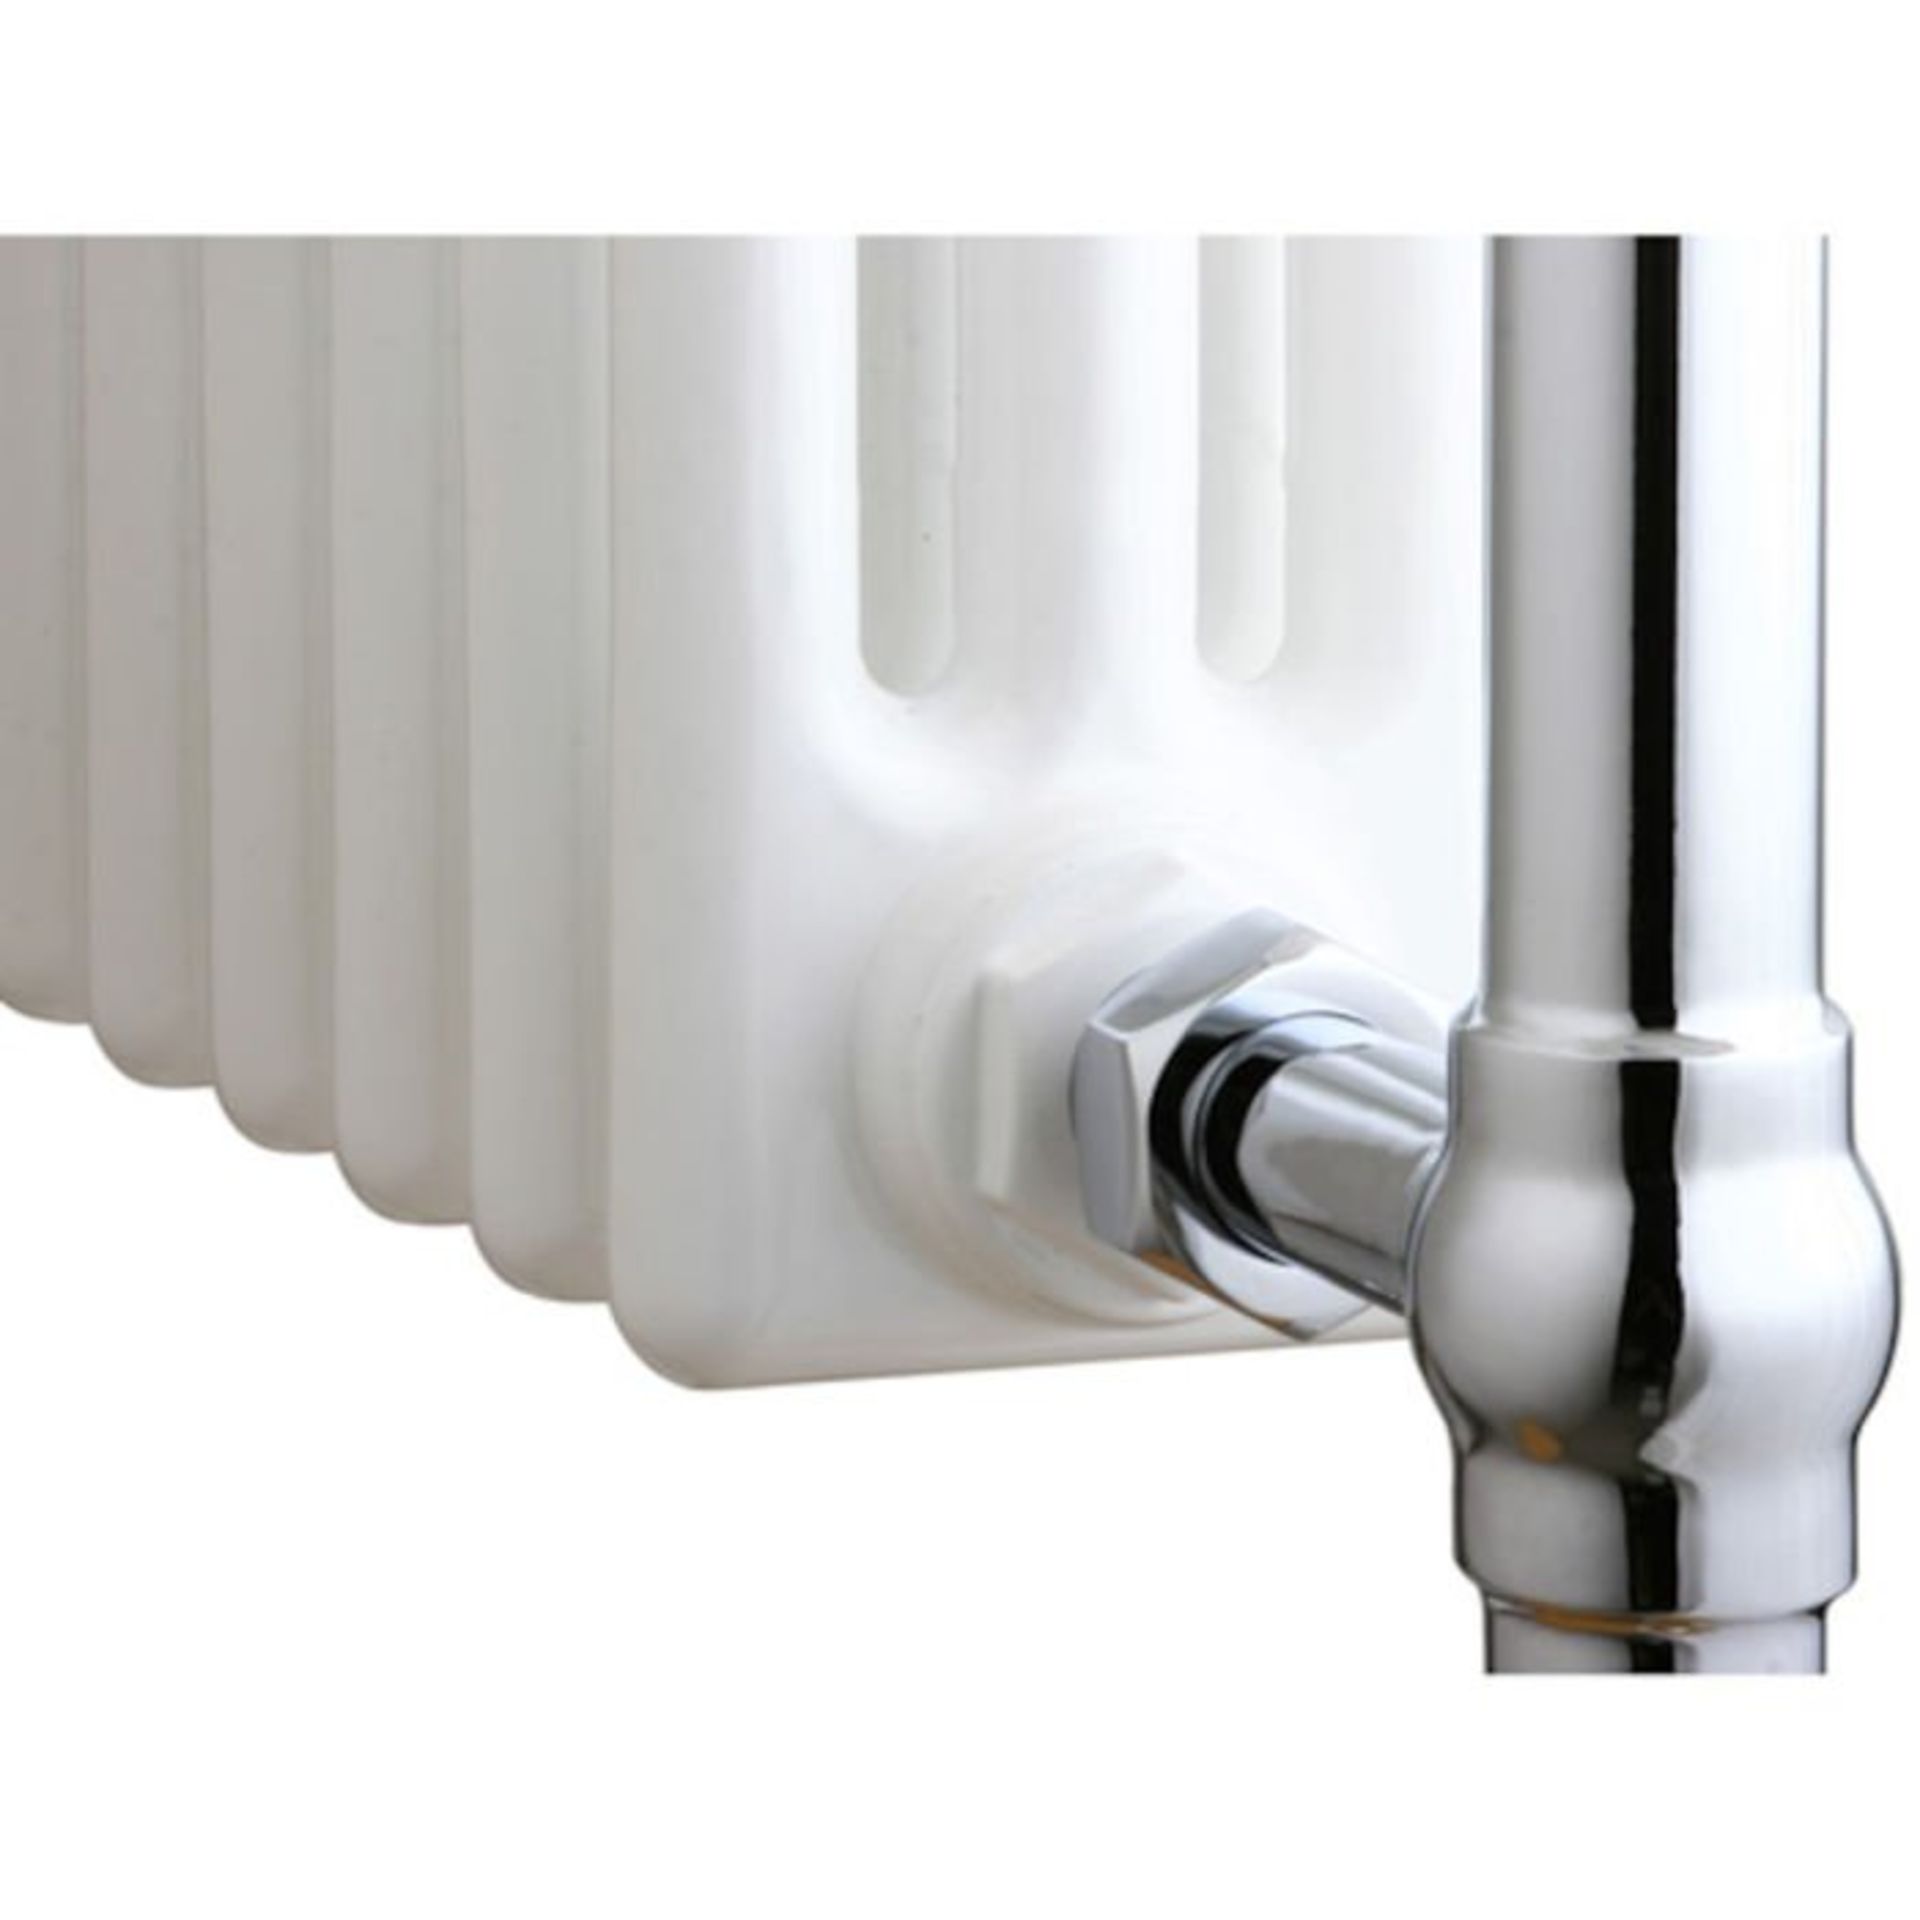 (Y121) 952x659mm Large Traditional White Towel Rail - Cambridge. £341.99. Complies with ISO9001:2008 - Image 3 of 5